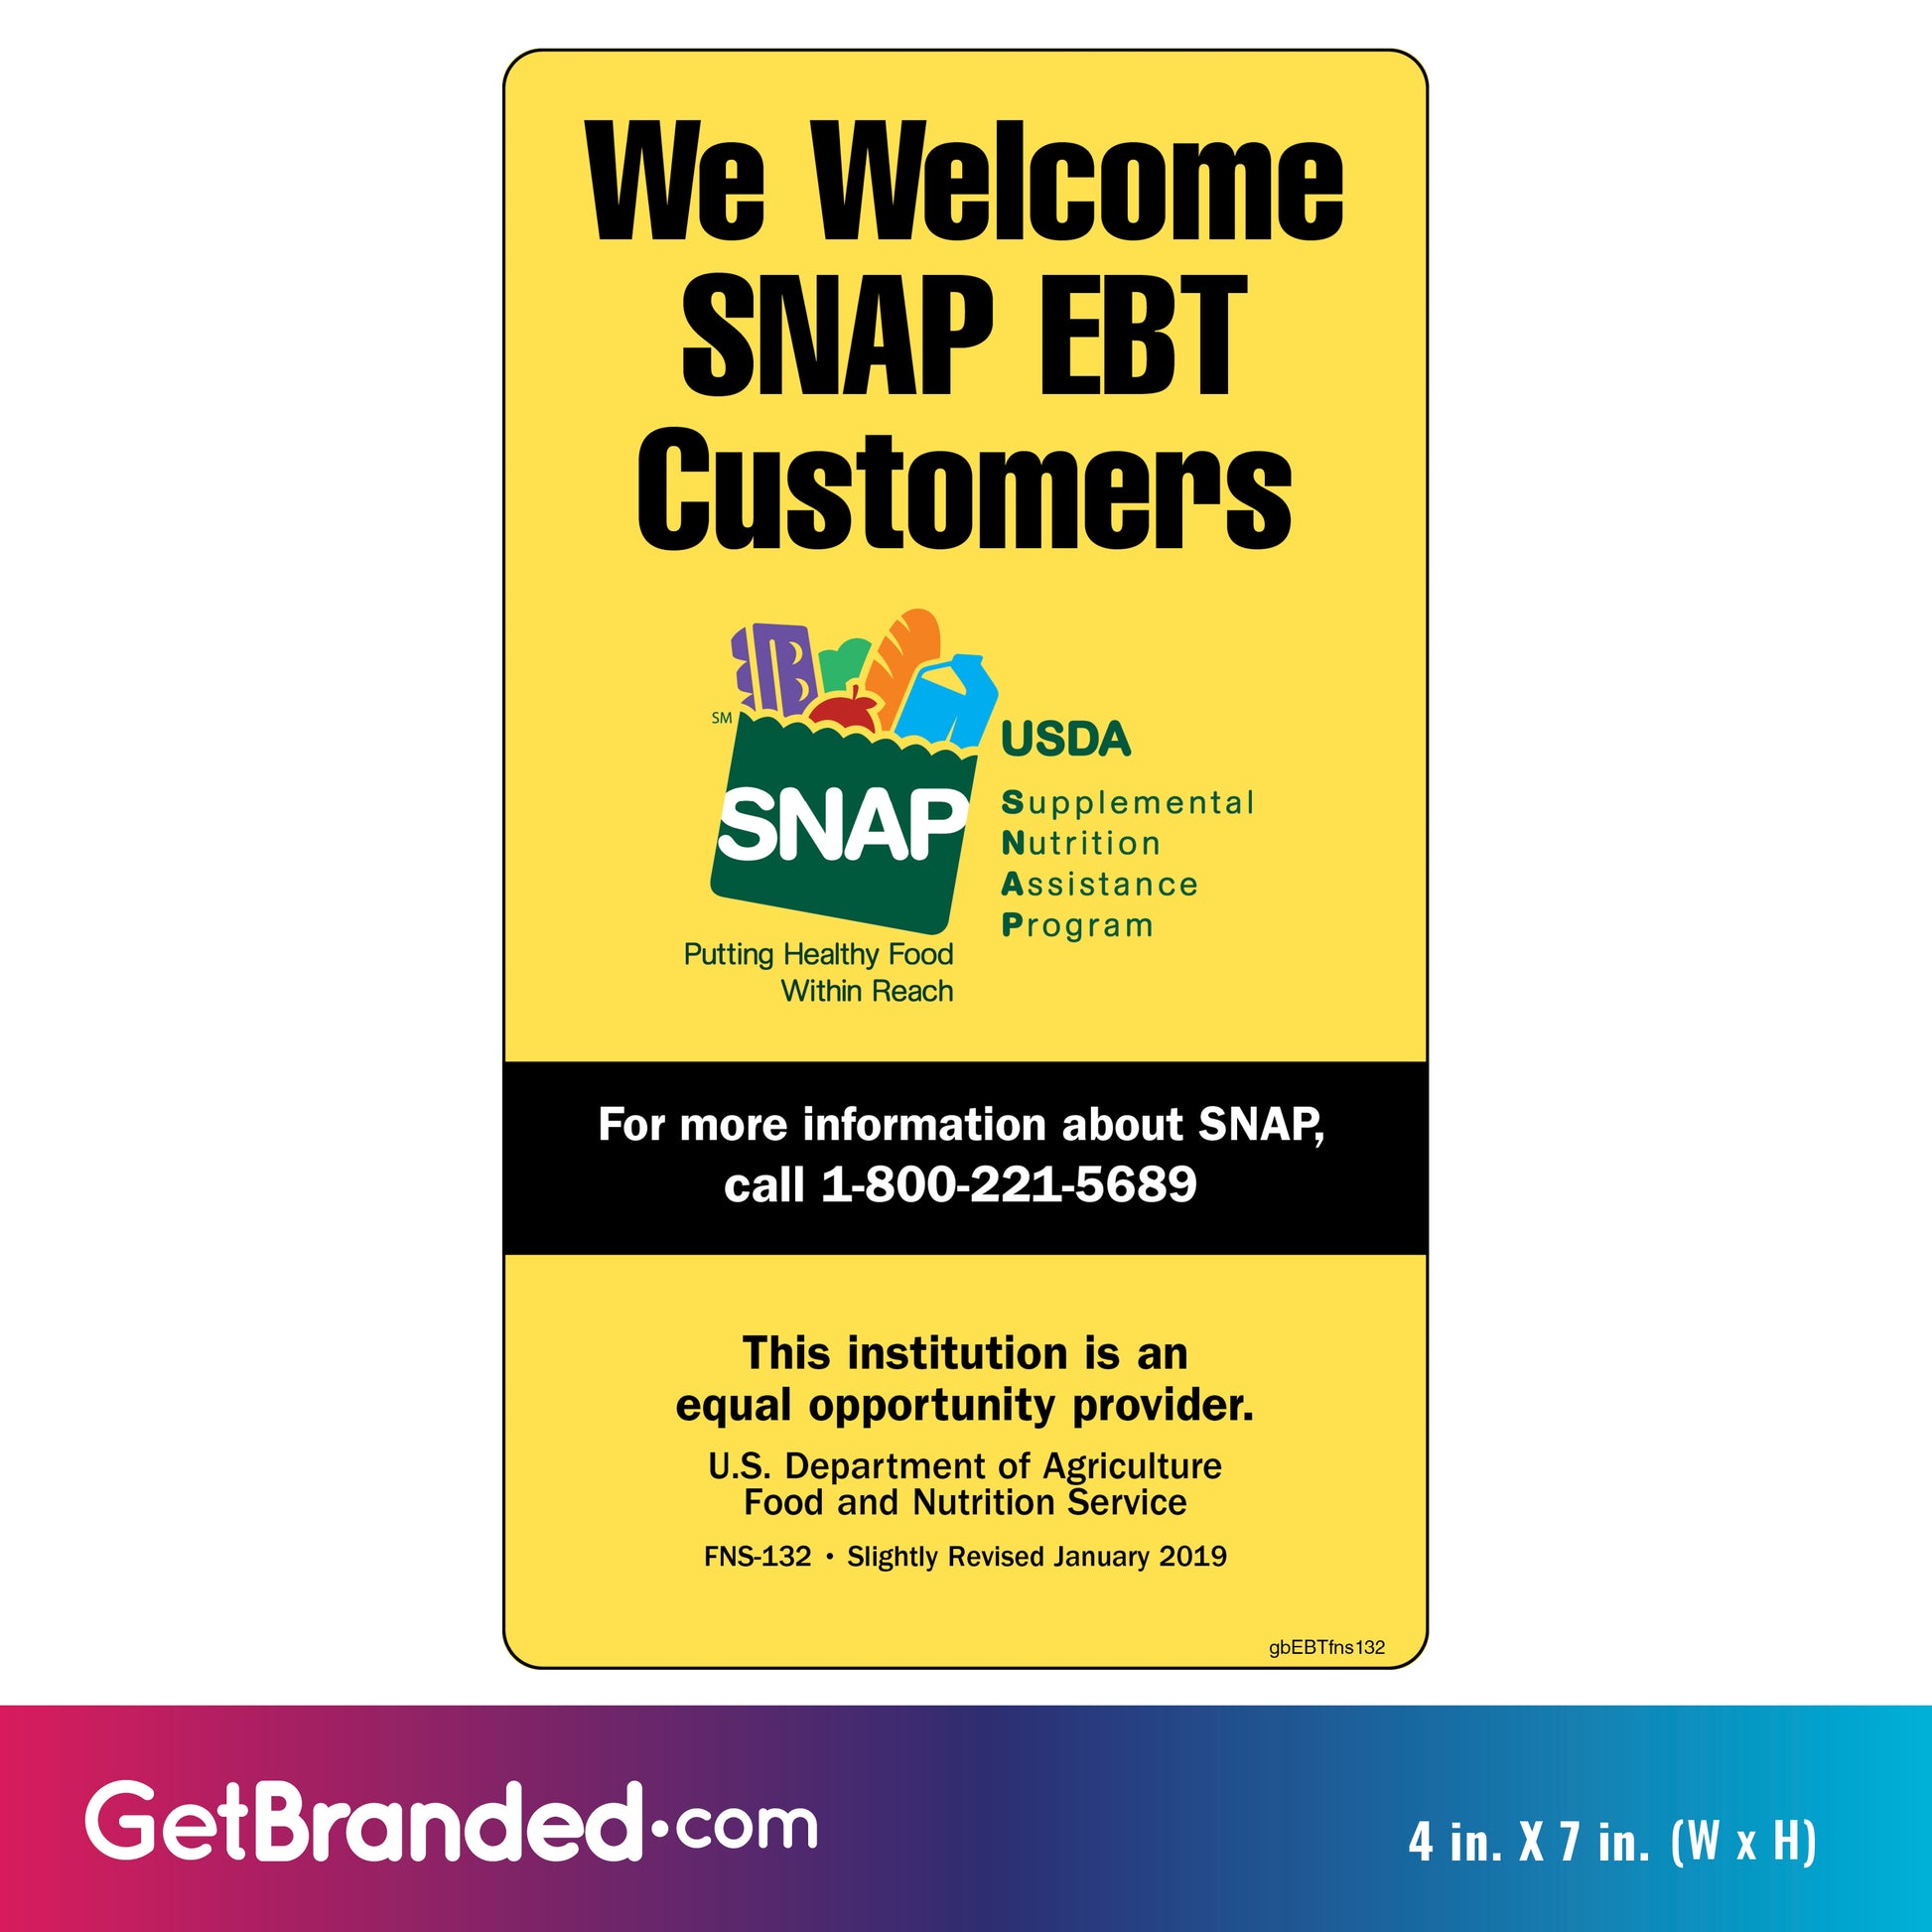 We welcome SNAP EBT customers sticker size guide